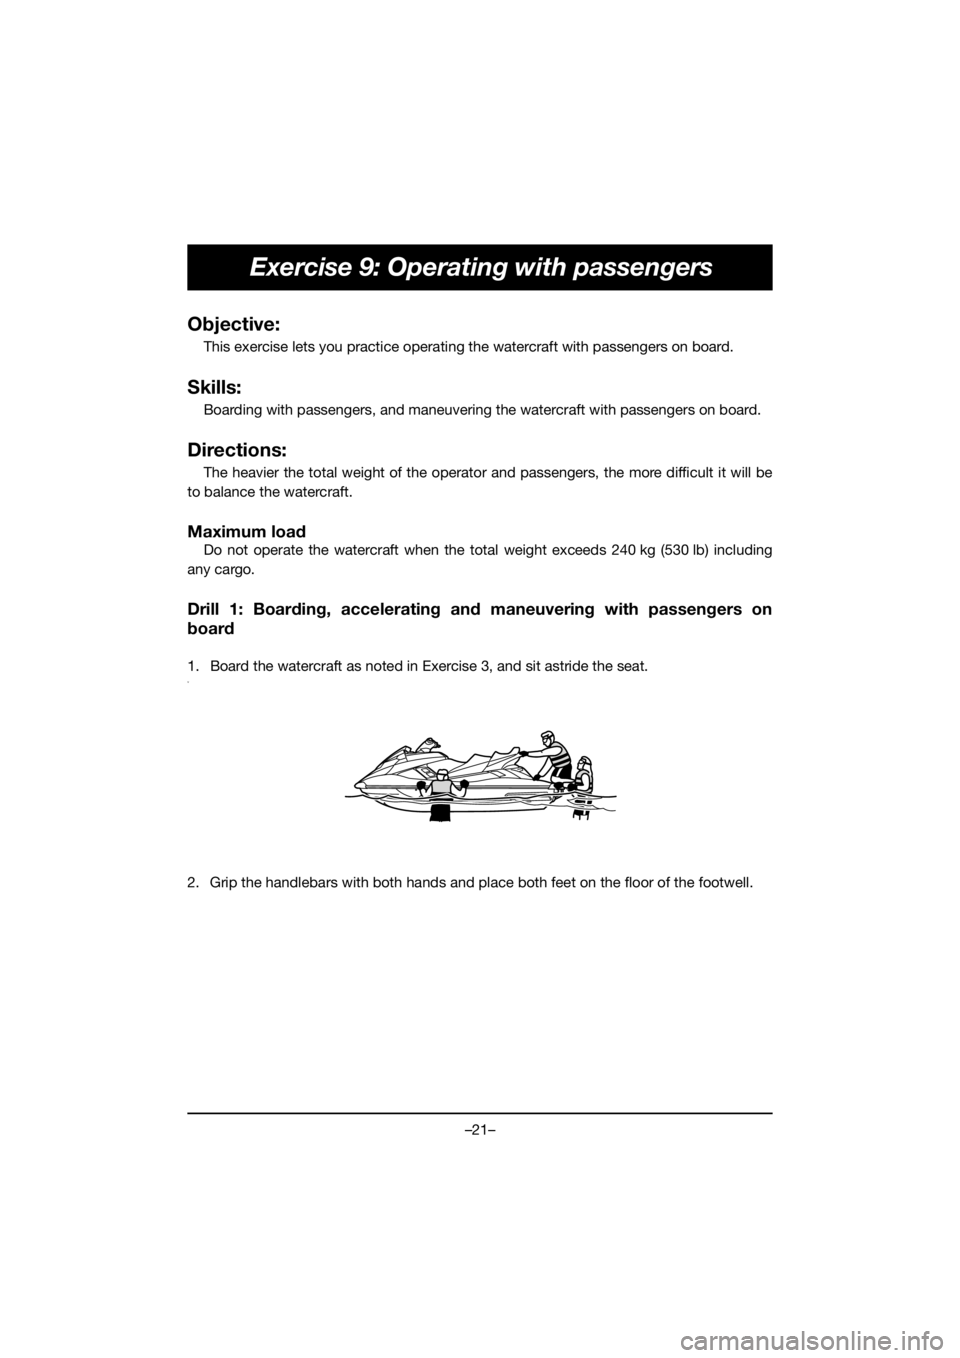 YAMAHA FX HO 2020  Notices Demploi (in French) –21–
Exercise 9: Operating with passengers
Objective:
This exercise lets you practice operating the watercraft with passengers on board.
Skills:
Boarding with passengers, and maneuvering the water